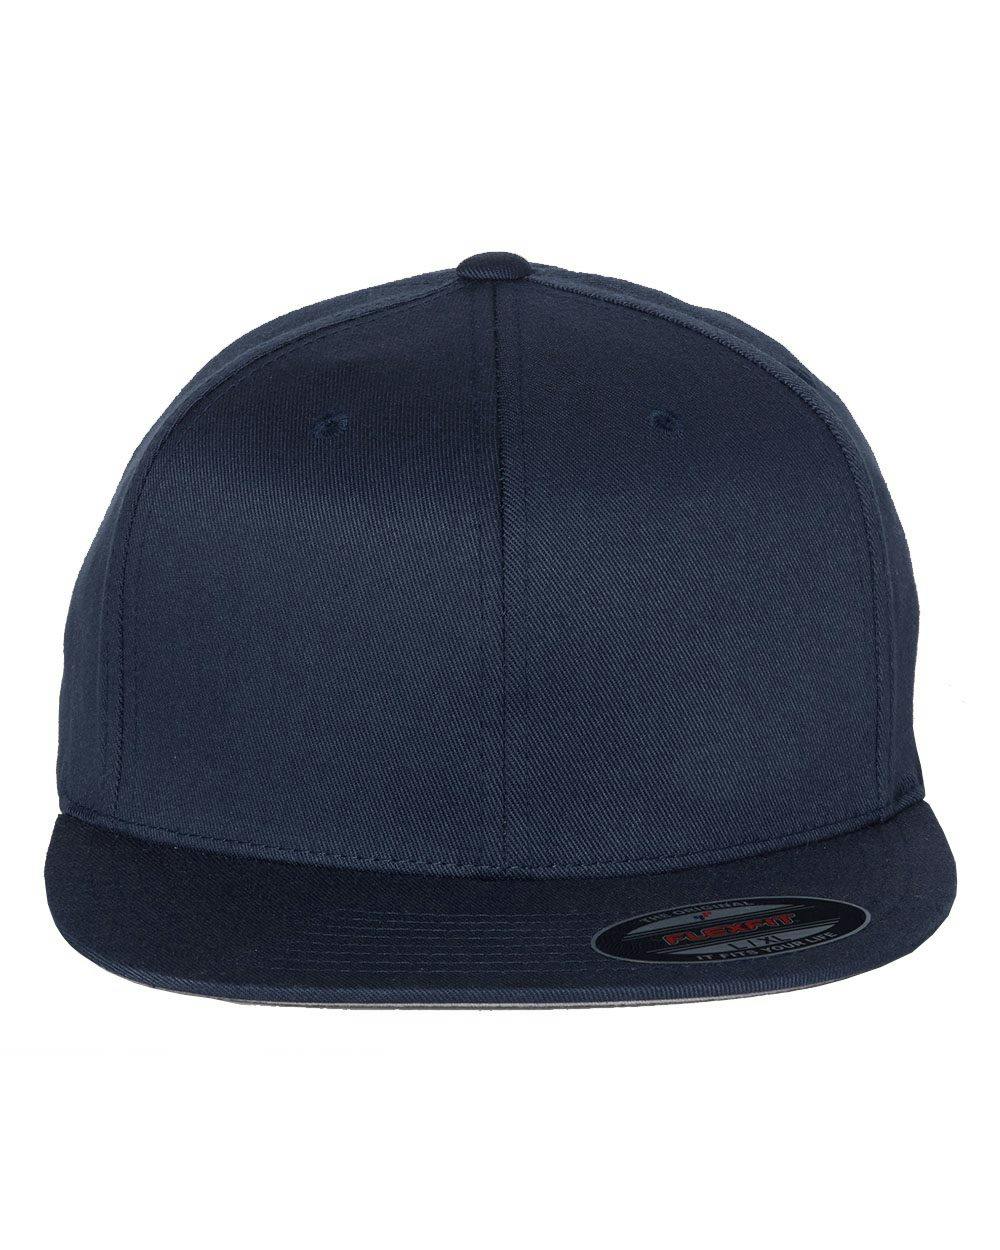 Image for Pro-Baseball On Field Cap - 6297F